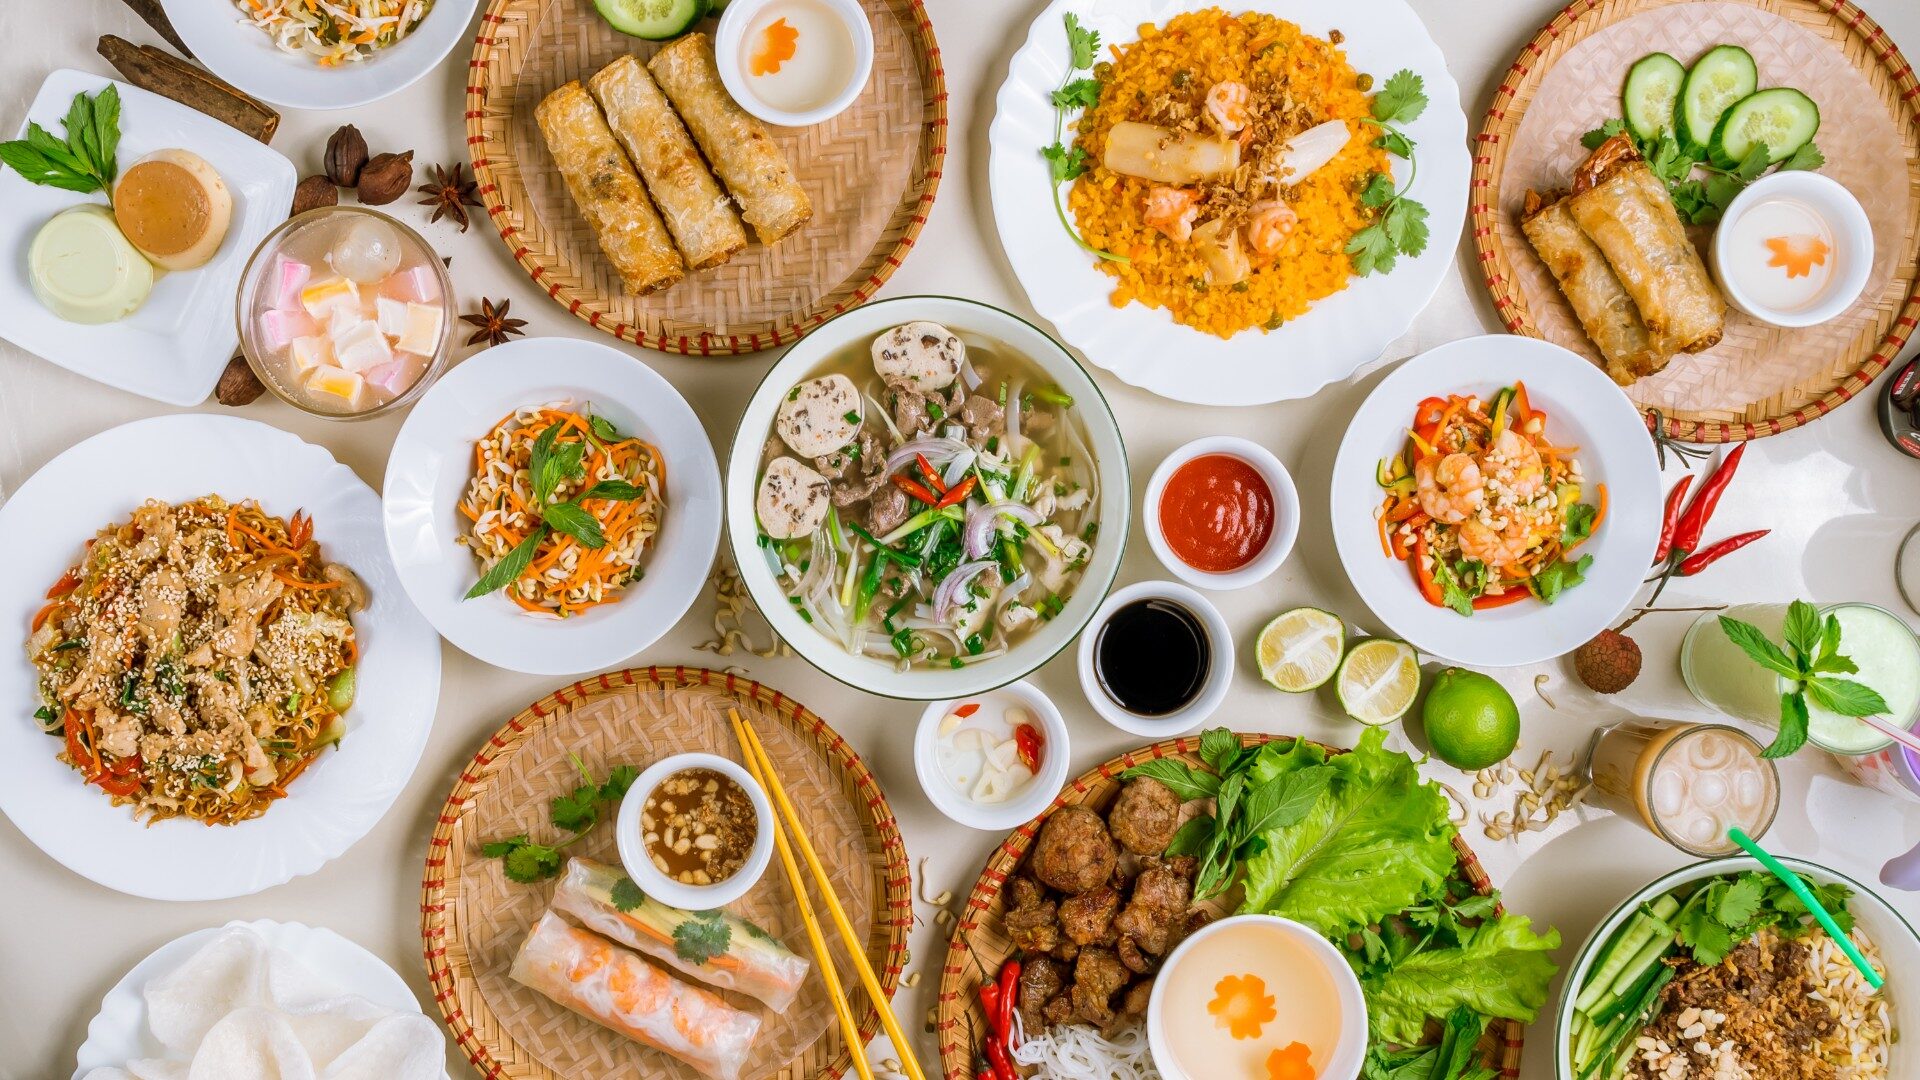 Best Food in Vietnam: 14 Famous Dishes to Try